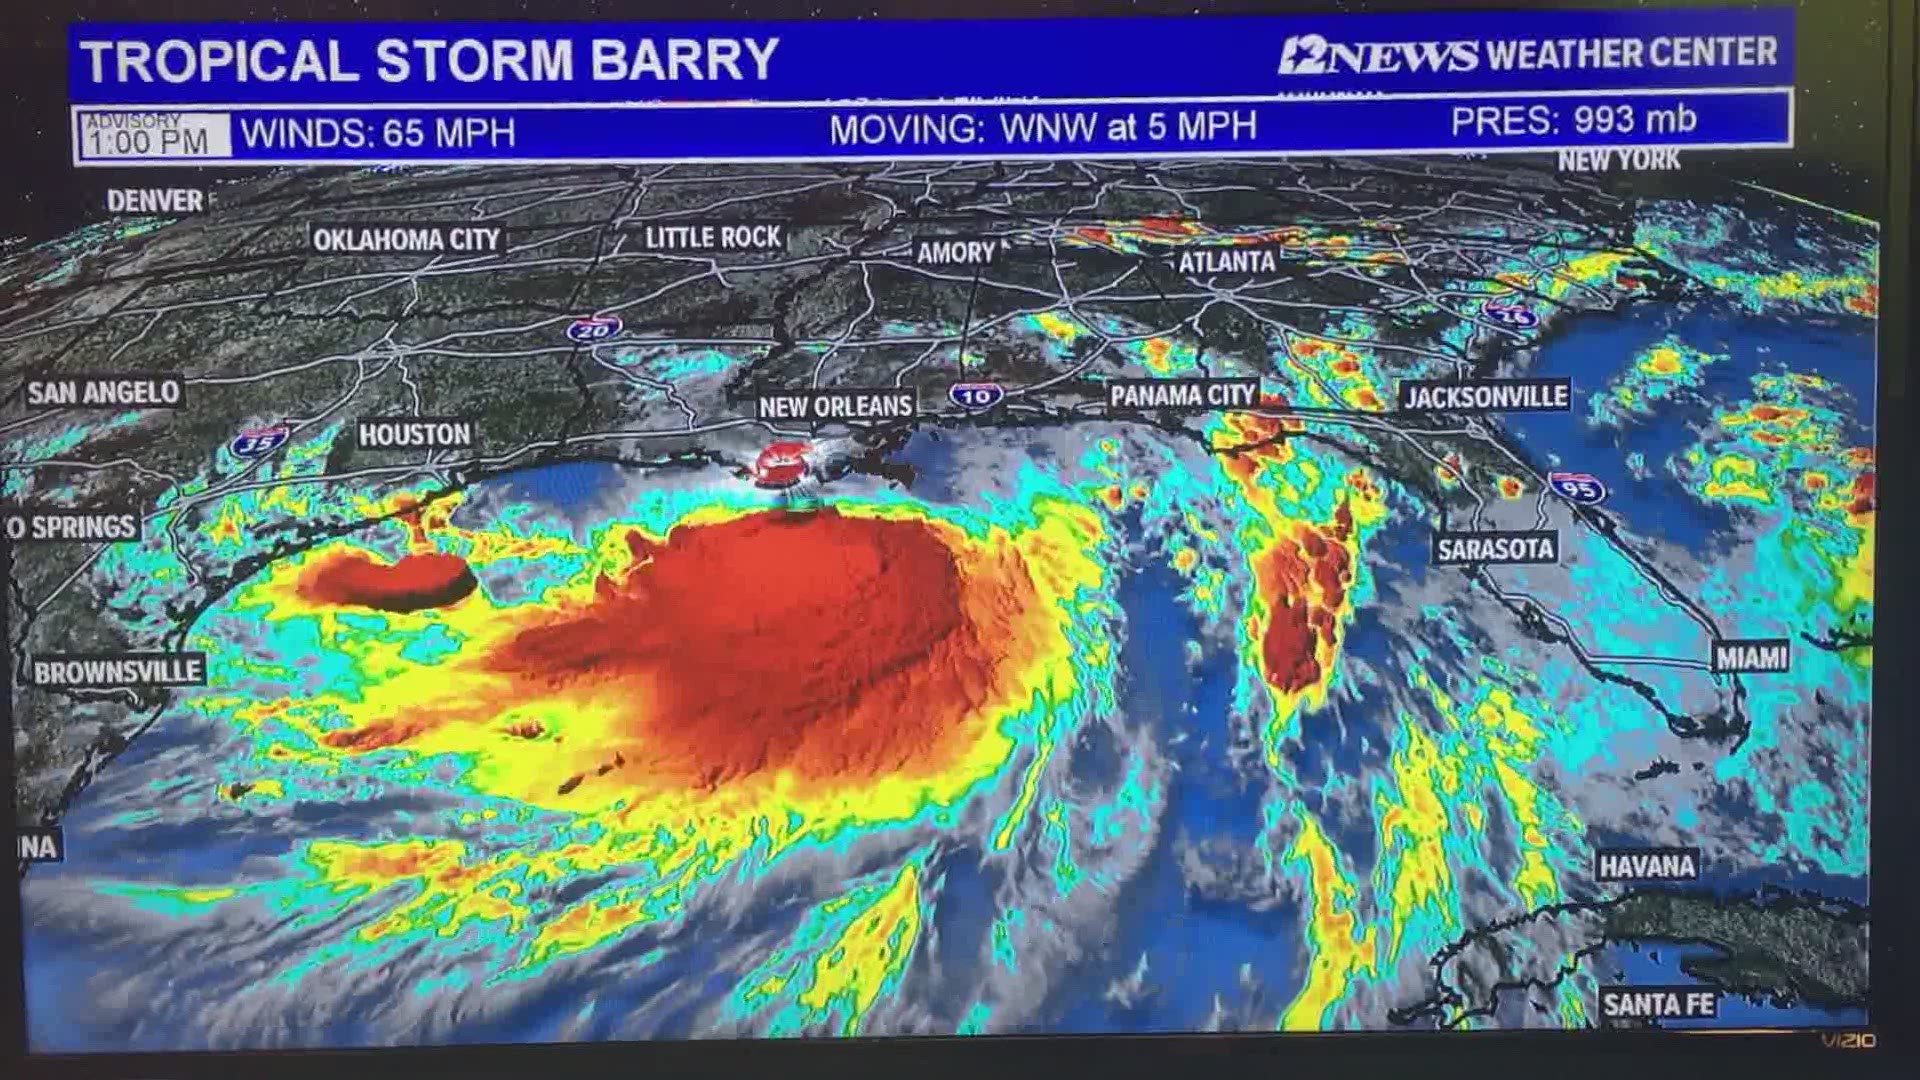 Tropical Storm Barry is now expected to make landfall around 7 a.m. Saturday morning along the Louisiana coastline as a category one hurricane according to the National Hurricane Center's latest update. The 1 p.m. update on Tropical Storm Barry from the National Hurricane Center reported Barry strengthening with winds of 65 mph.